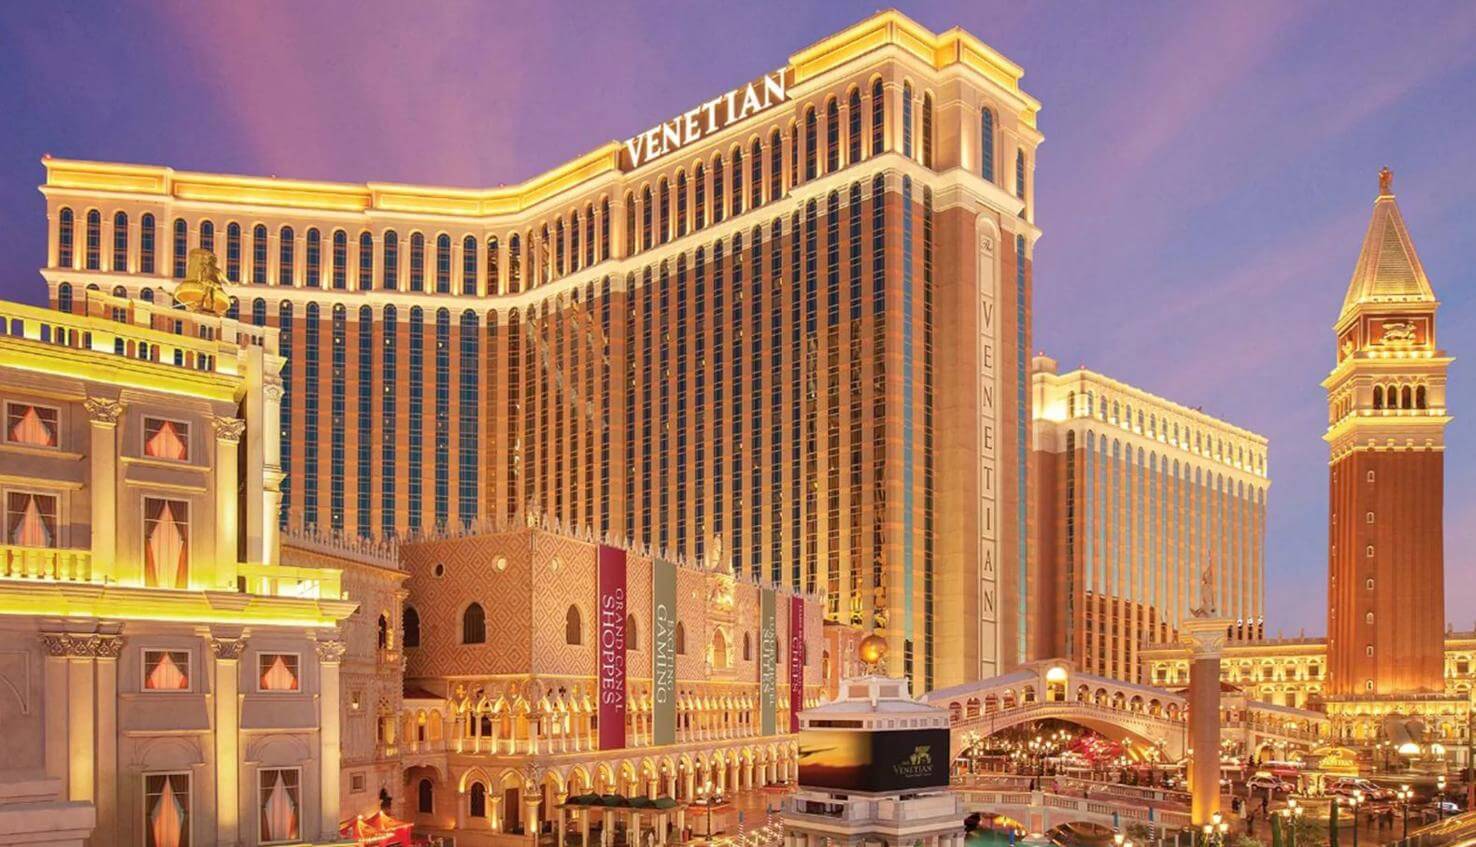 Las Vegas Sands Leaving The Strip With Sale of Venetian Hotel, Expo Center